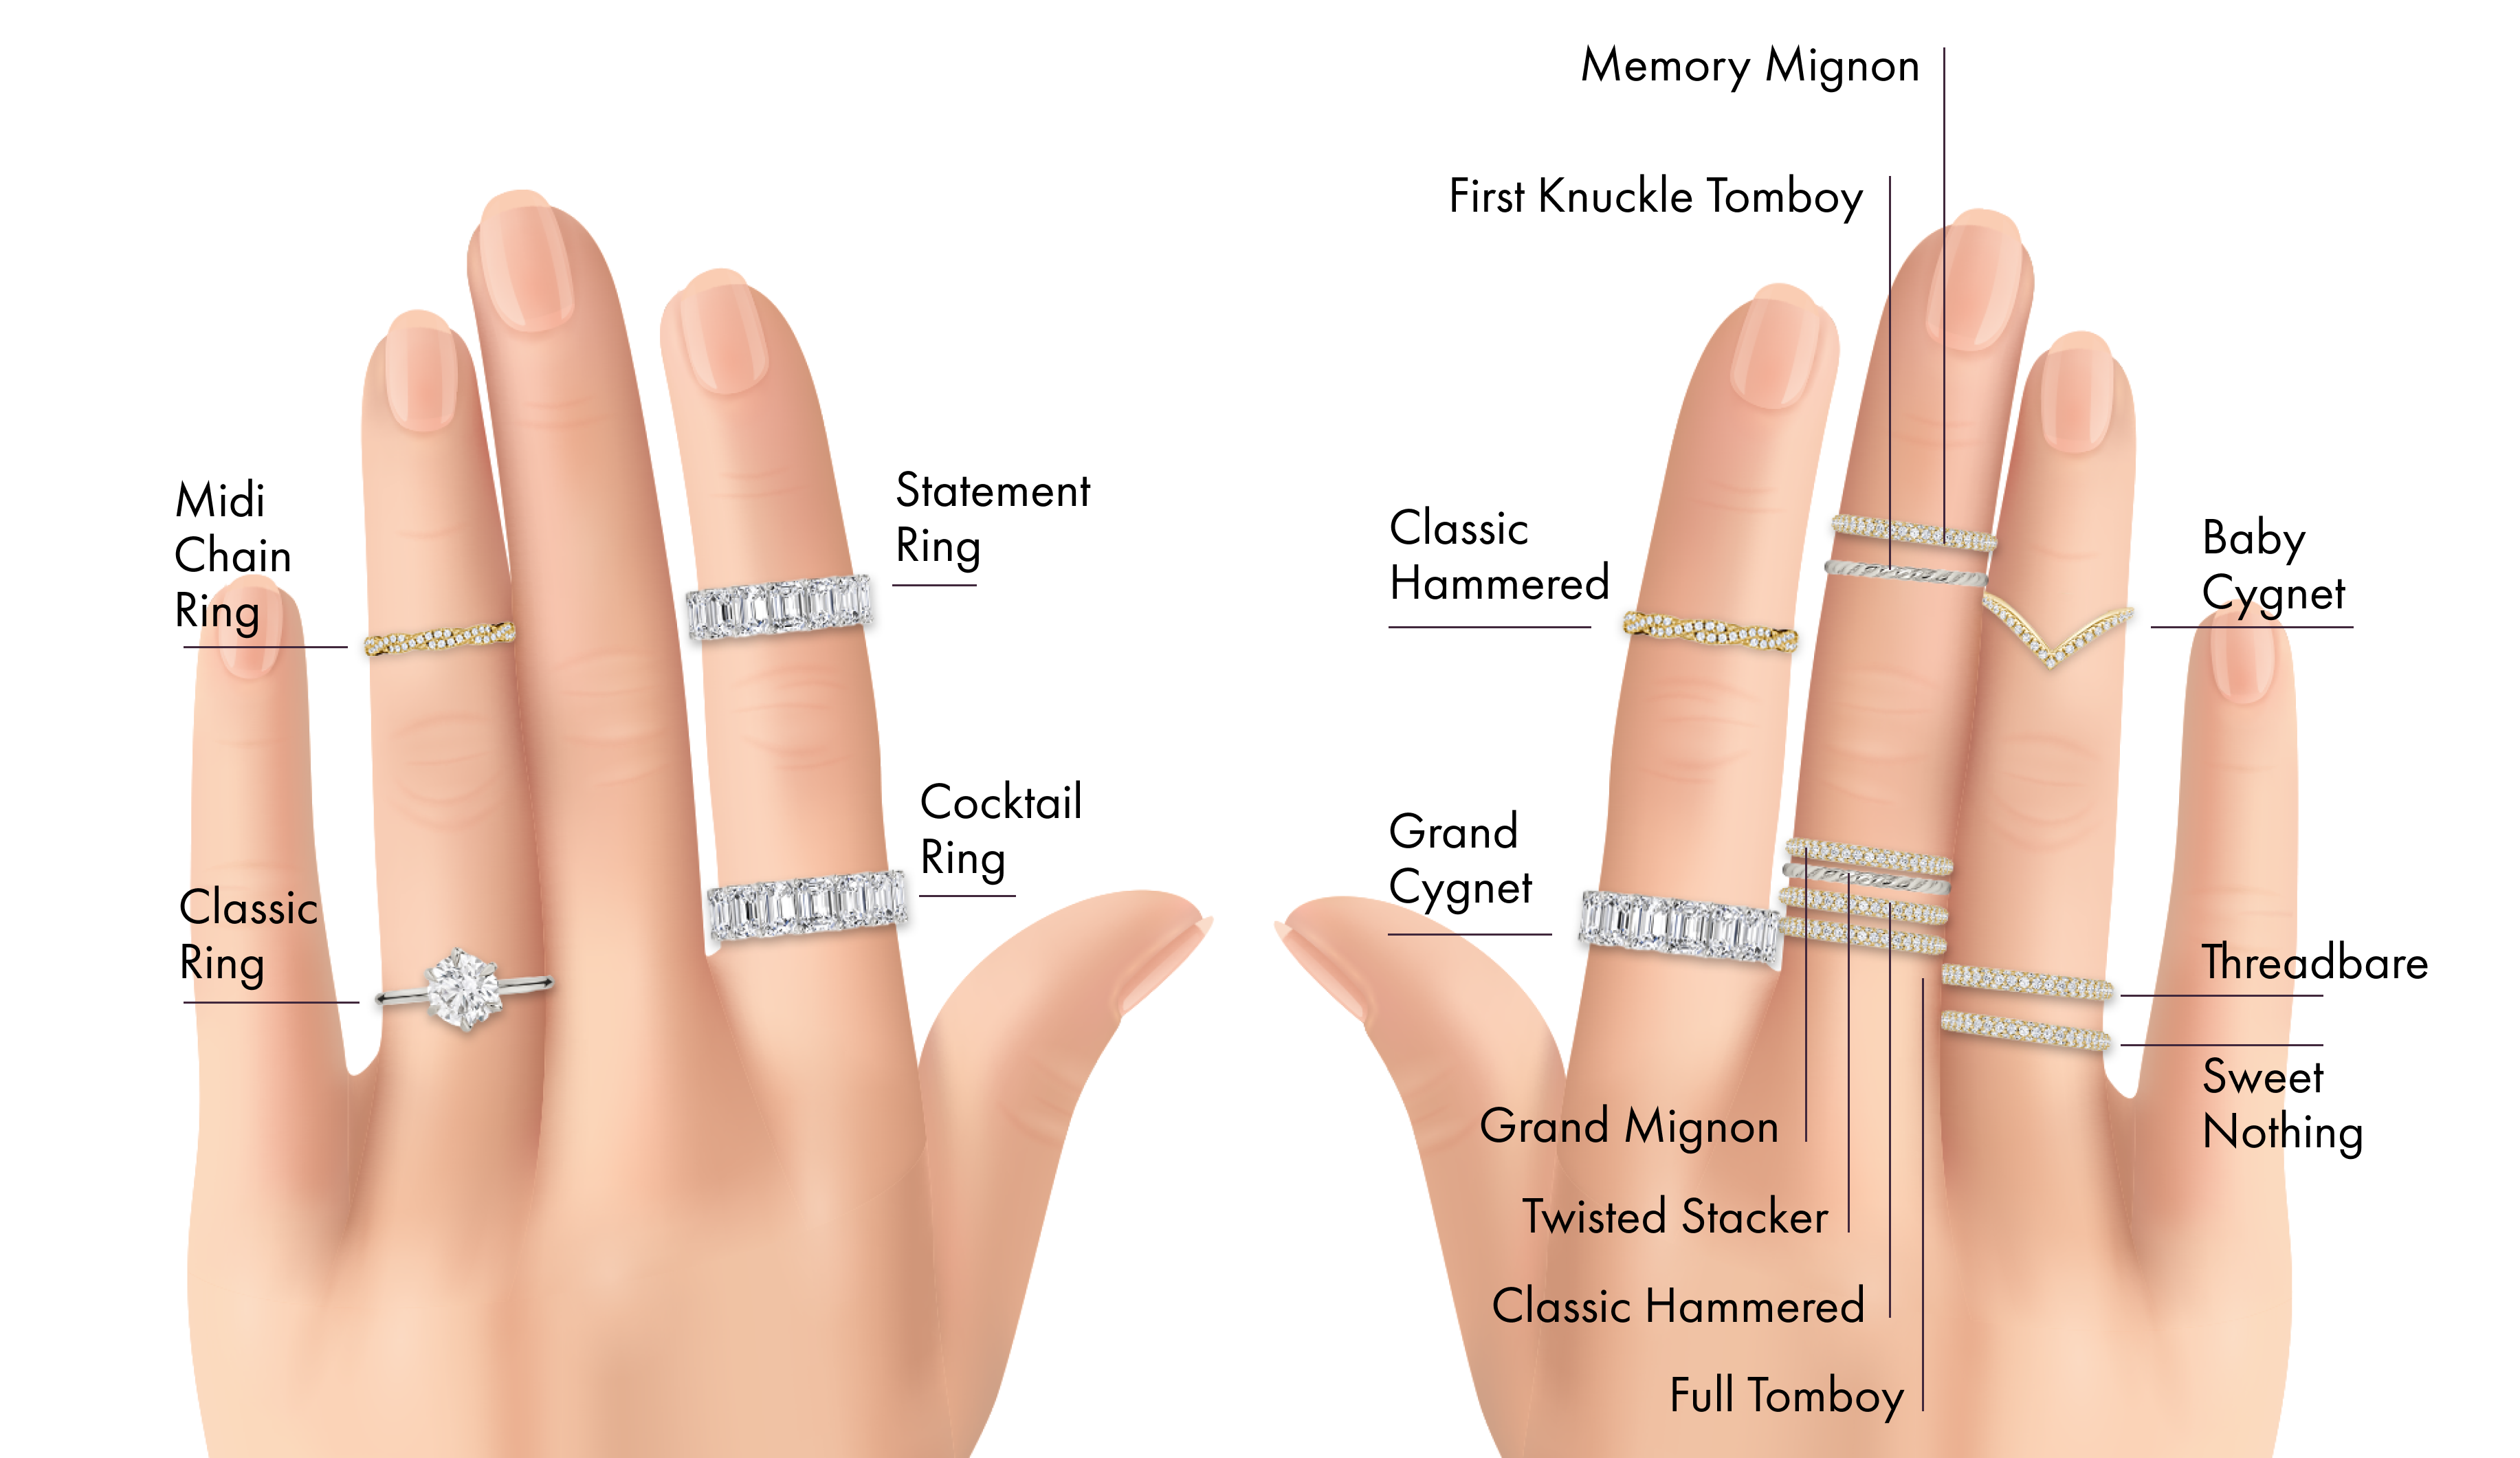 ring stacking guide showing placement of rings on all fingers including cocktail ring and statement ring on the index finger to the classic engagement and wedding ring on the ring finger